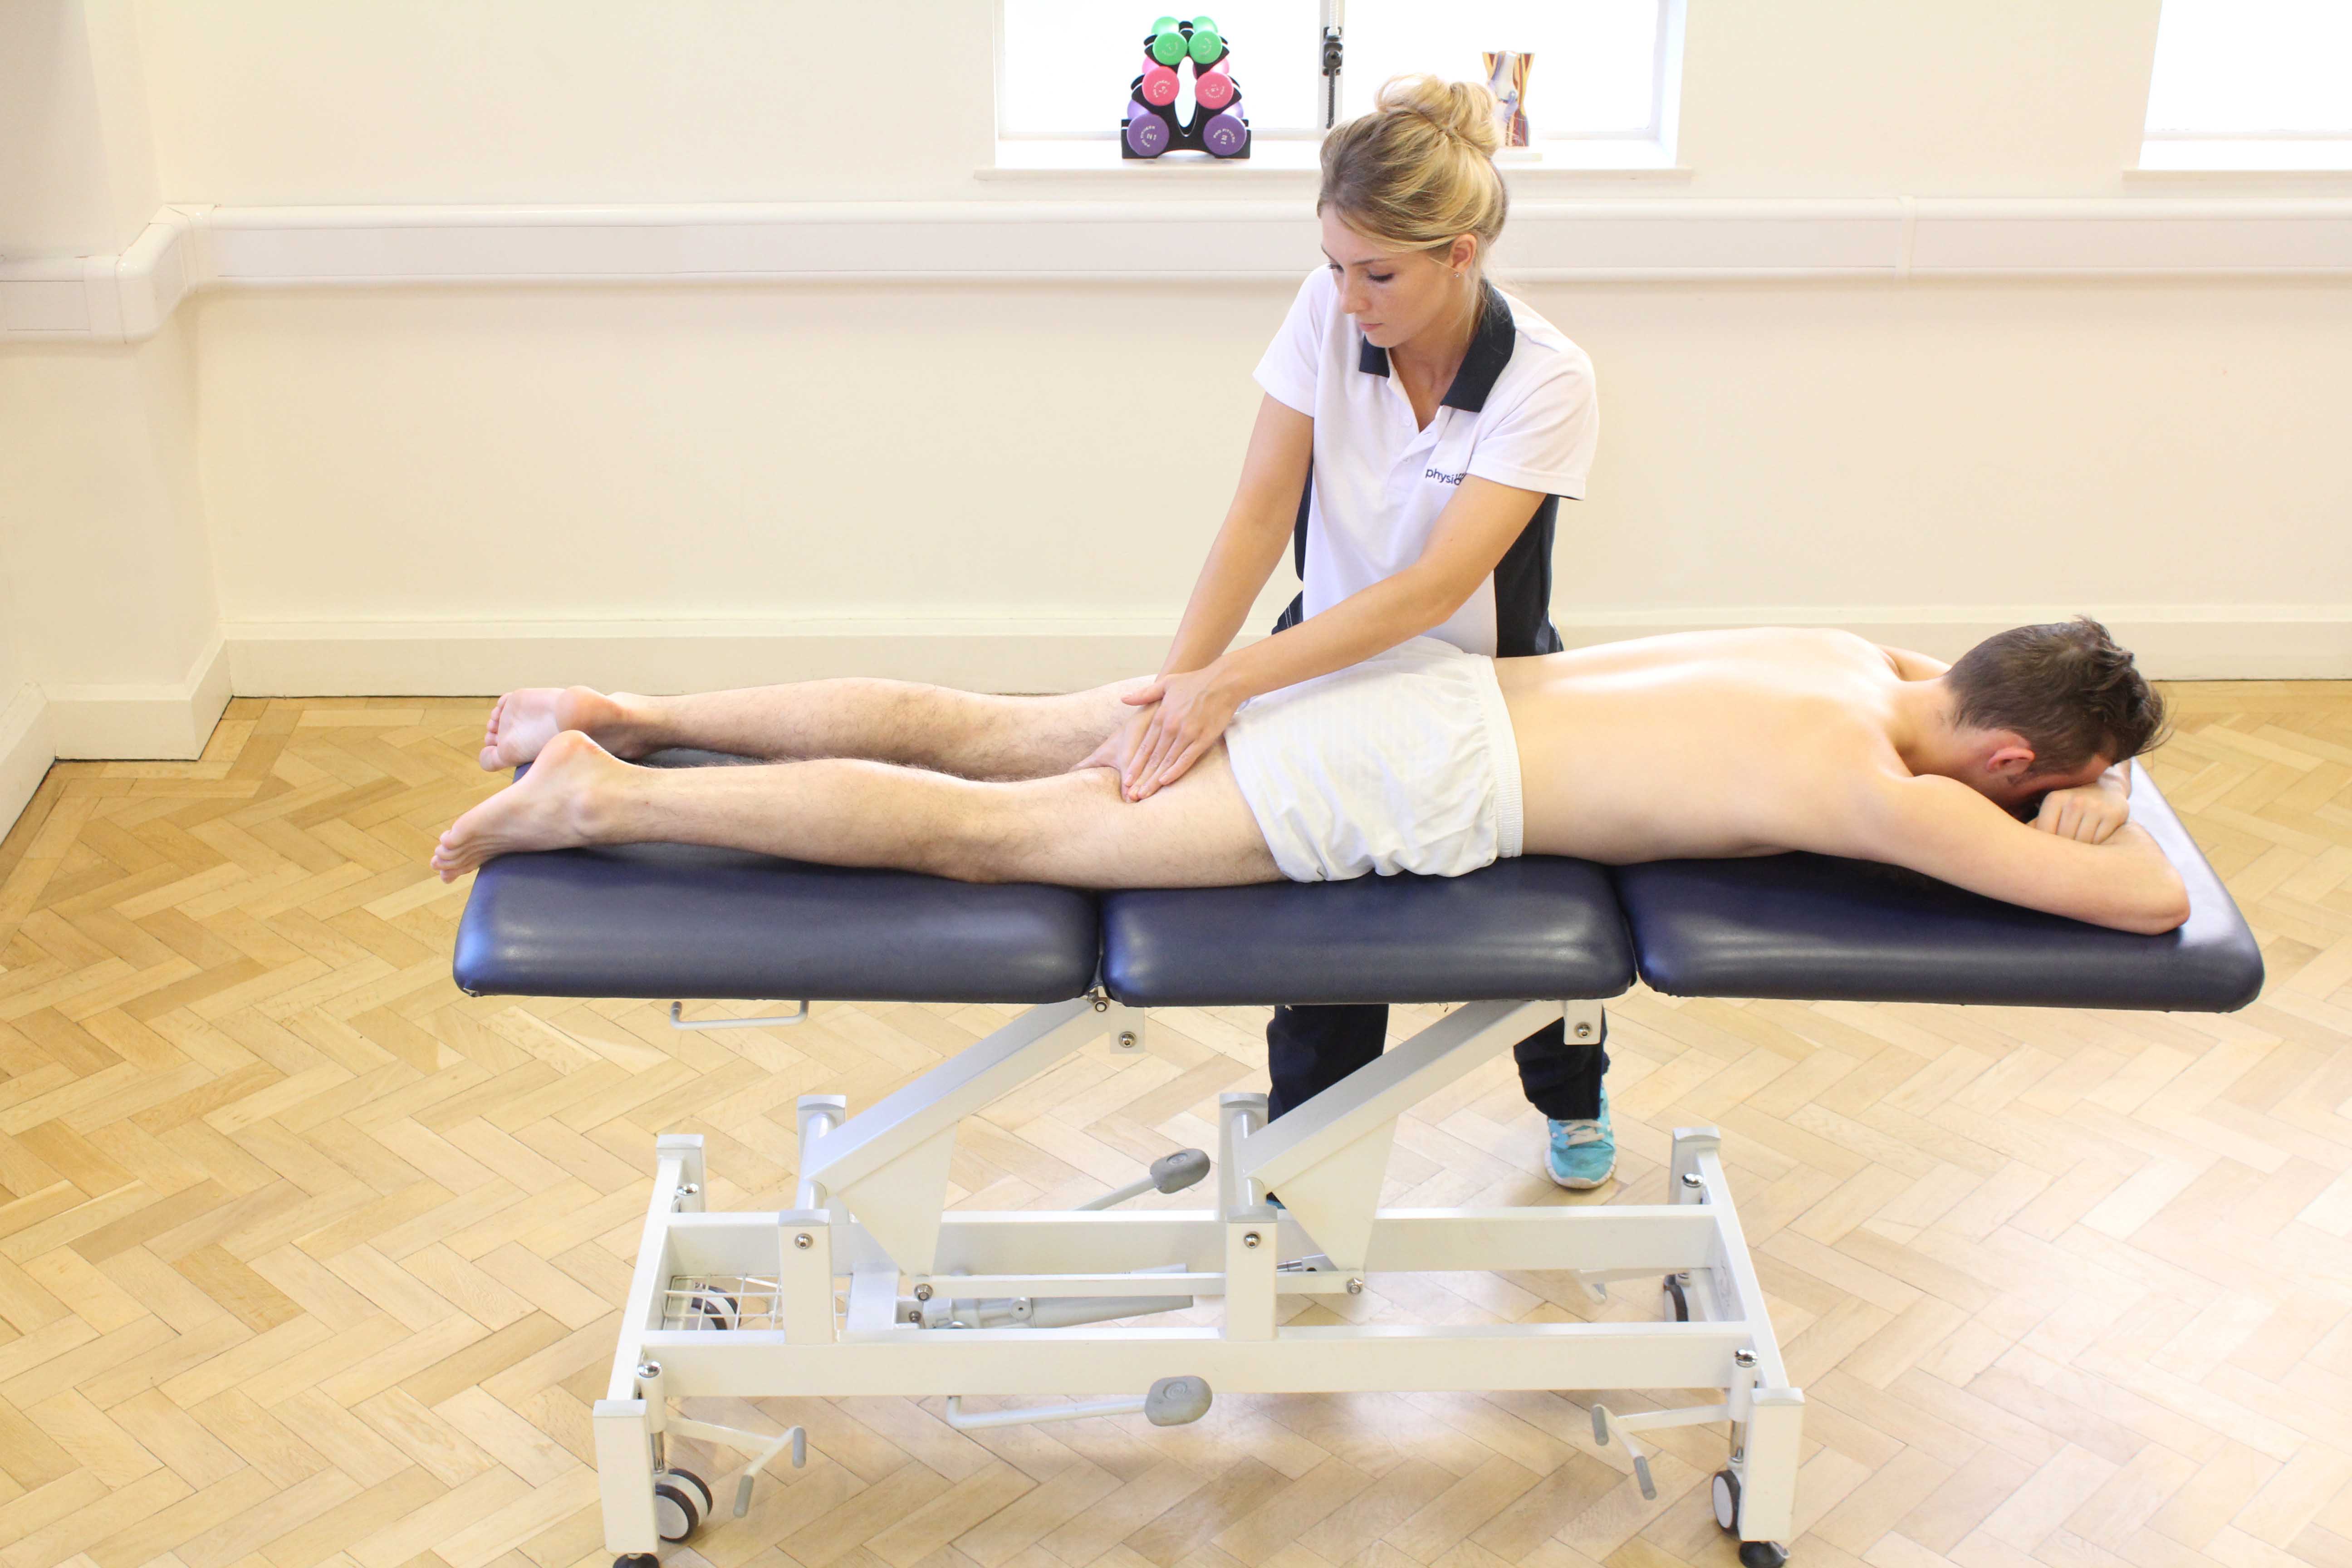 Trigger point massage of the hamstring muscles by an experienced MSK therapist